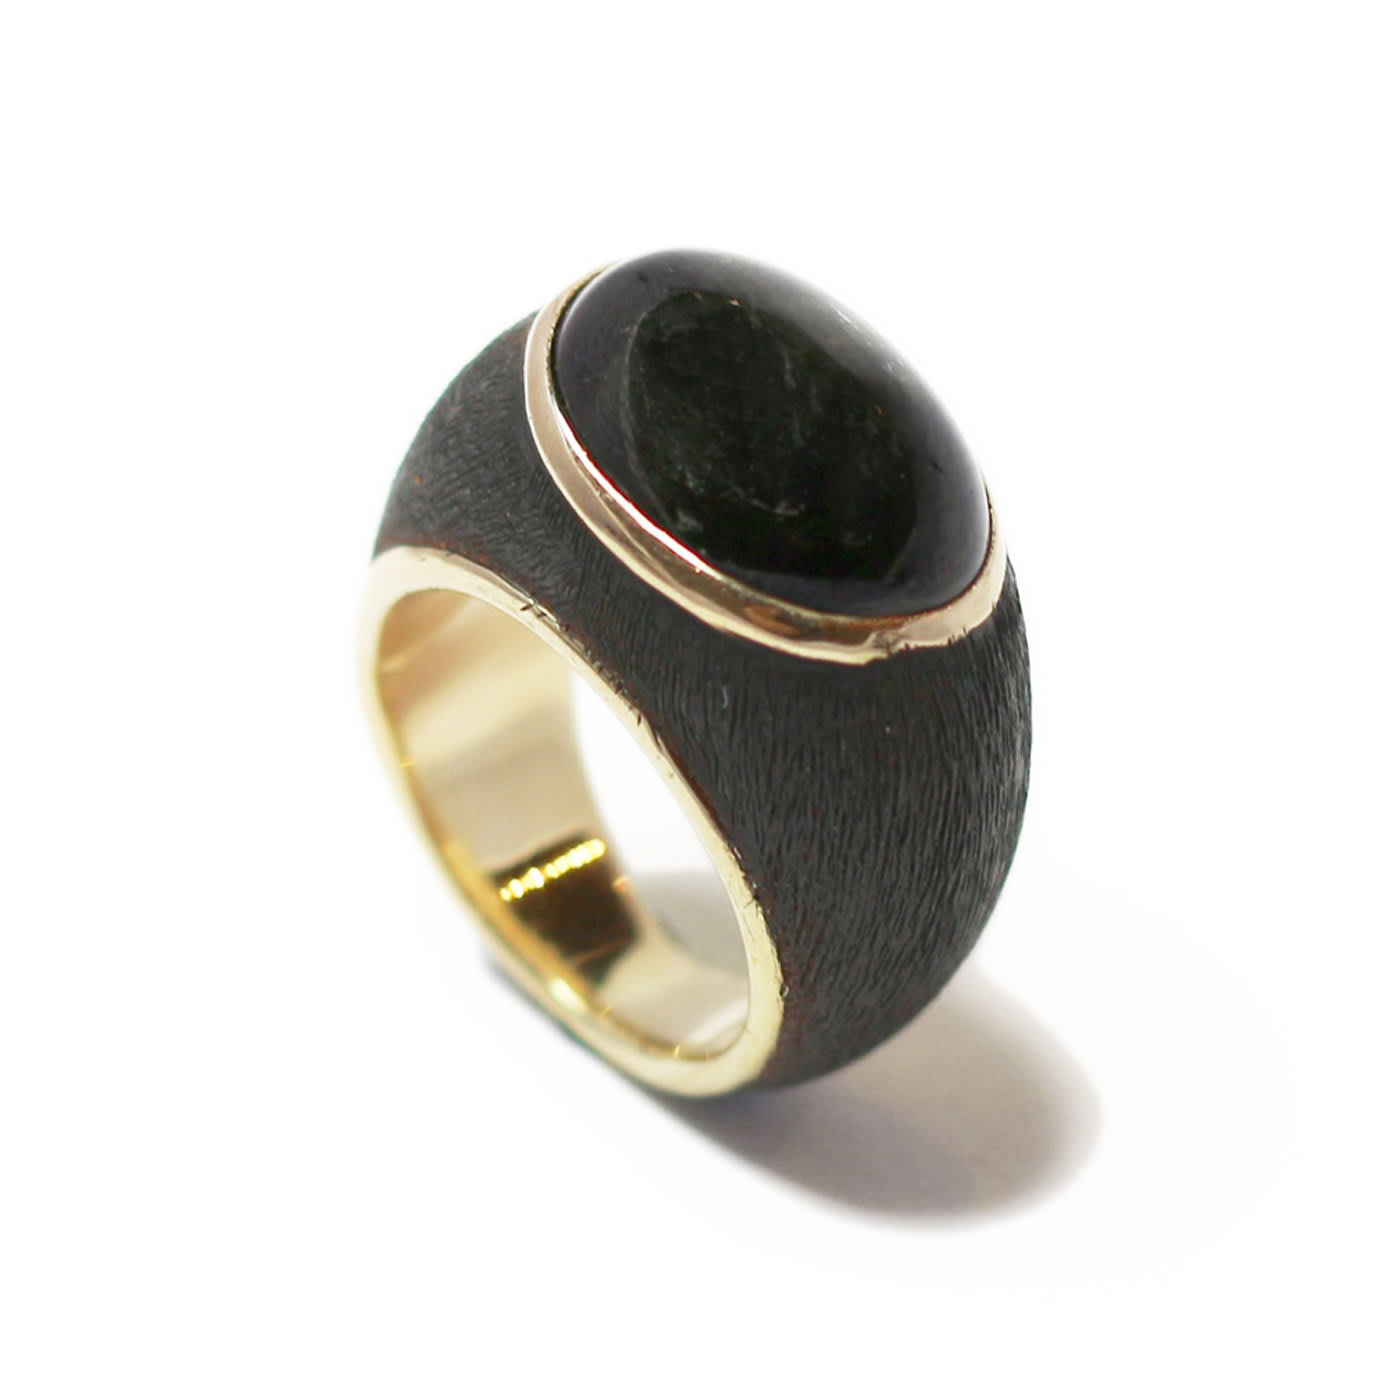 Iron Ring with Gold and Onyx - Marco Baroni